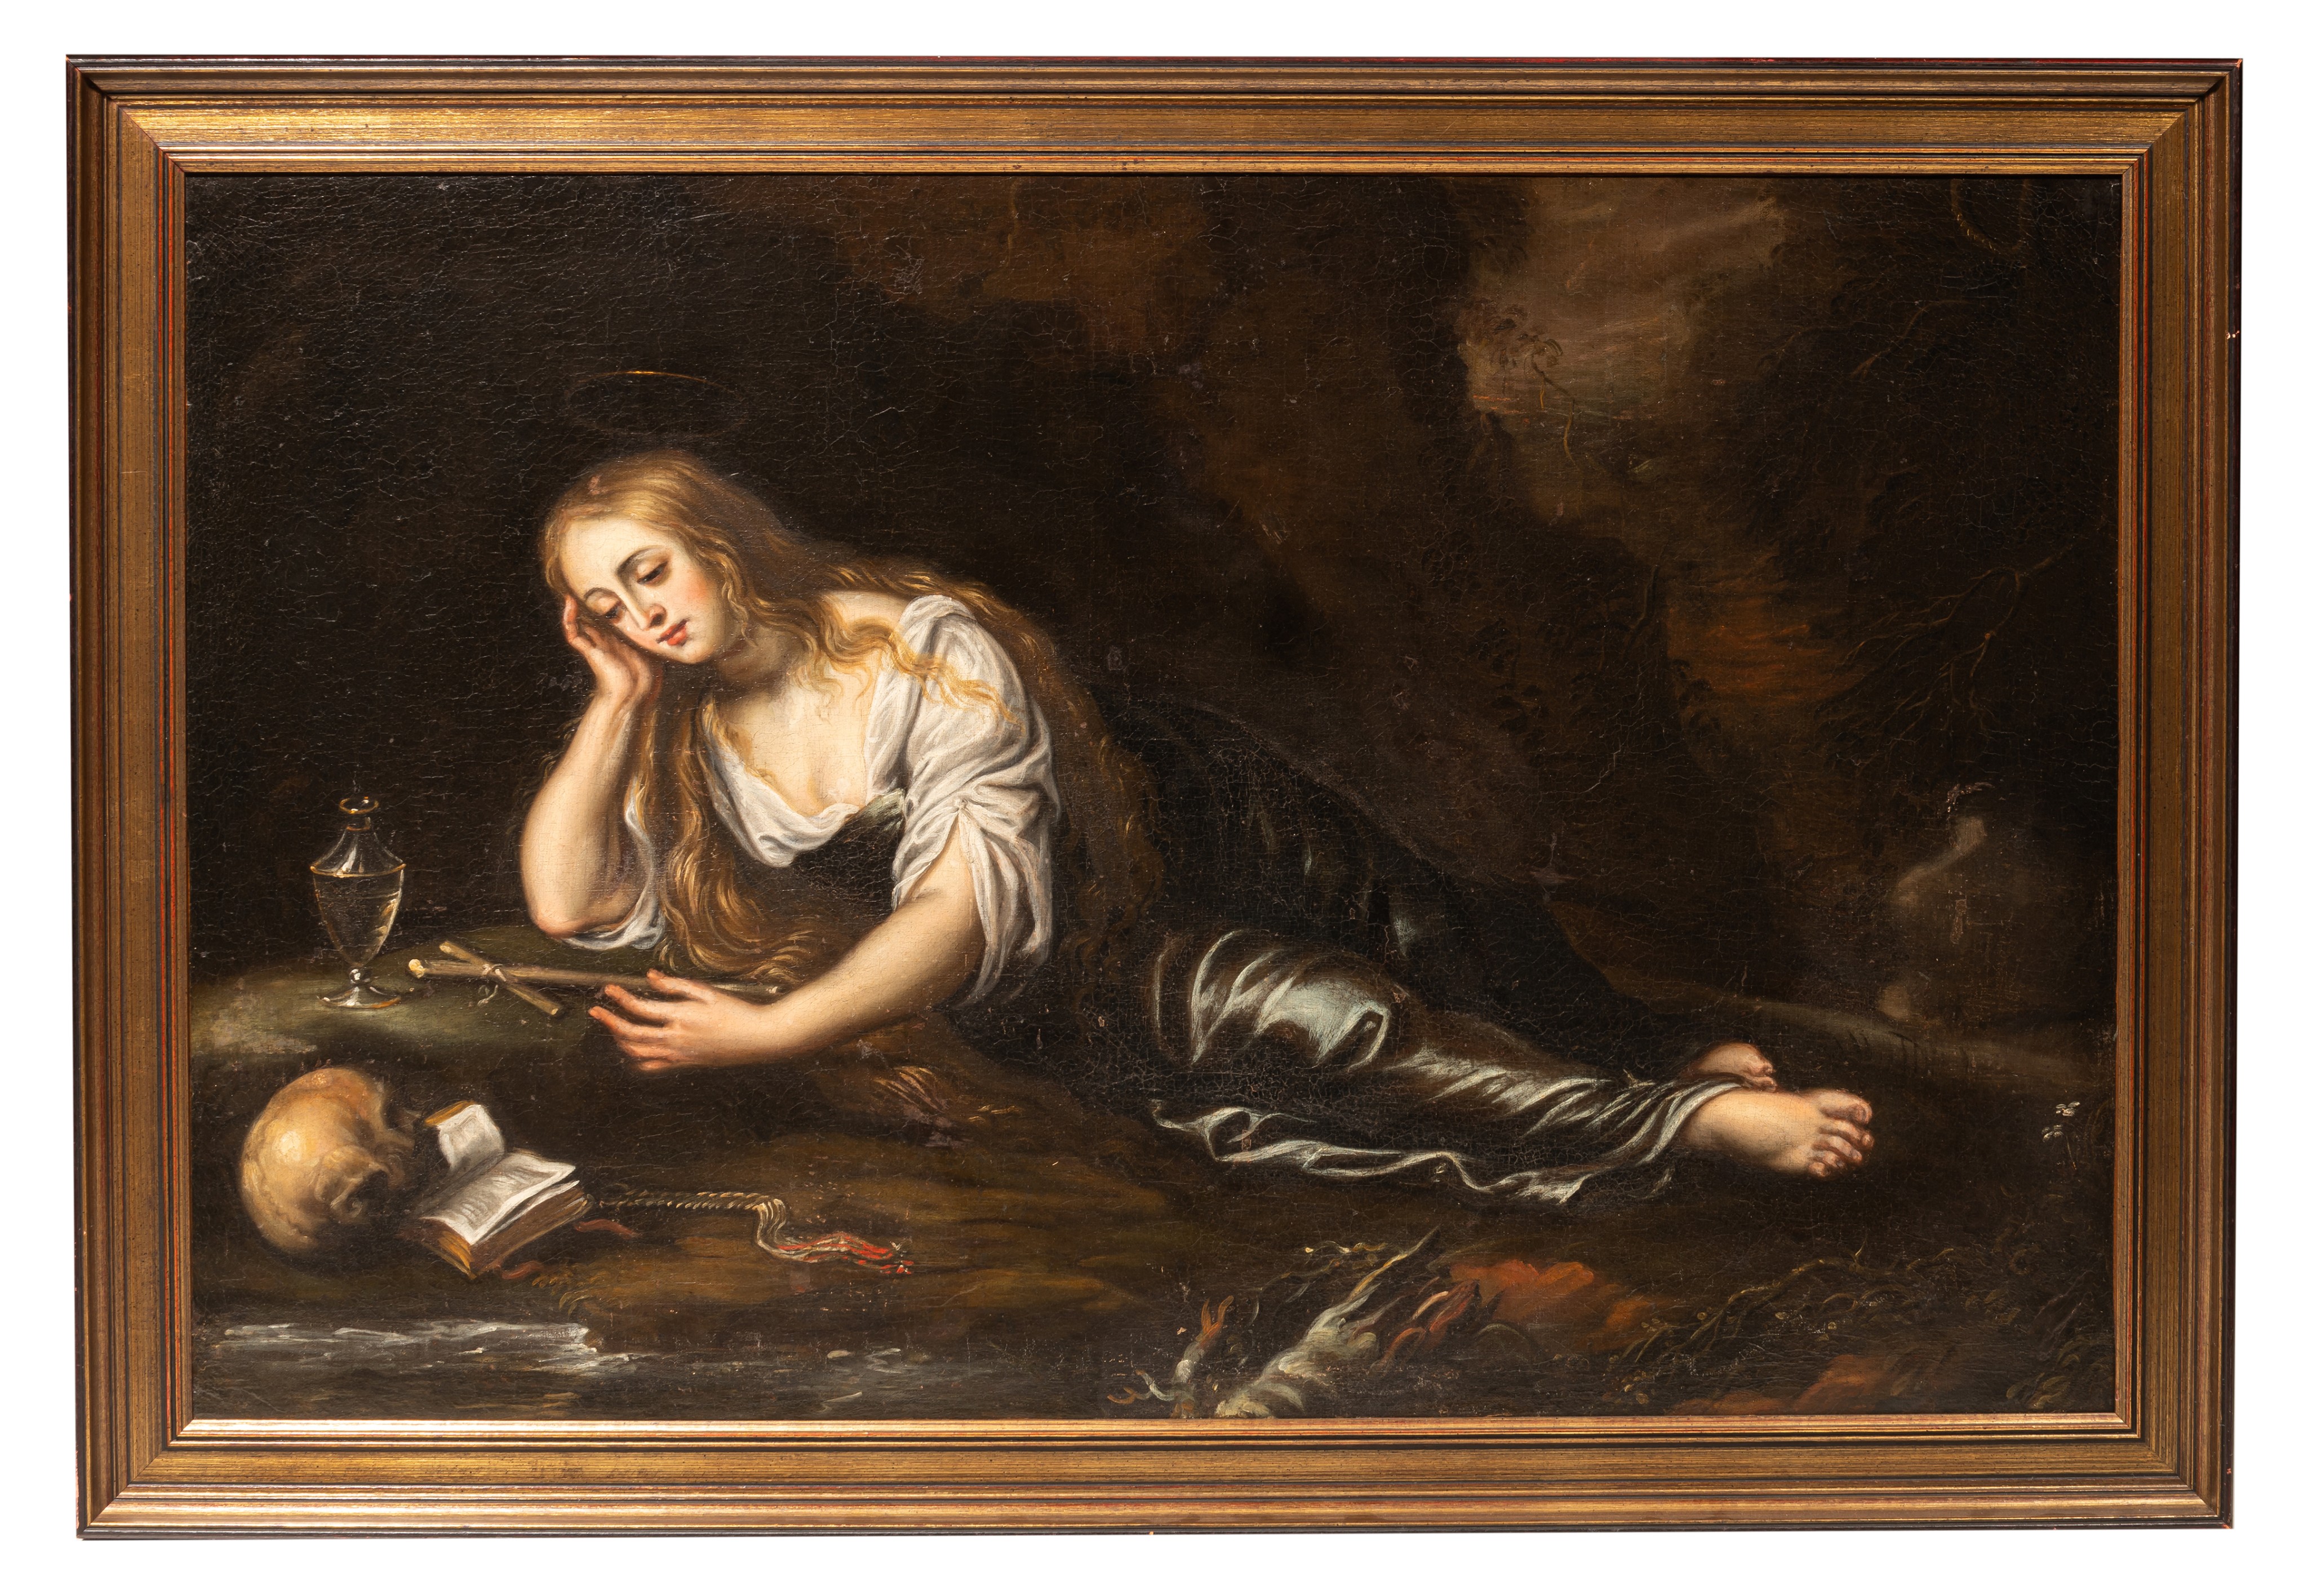 The penitent Mary Magdalene, 17thC, oil on canvas 85 x 130 cm. (33.4 x 51.1 in.), Frame: 98 x 143 cm - Image 2 of 6